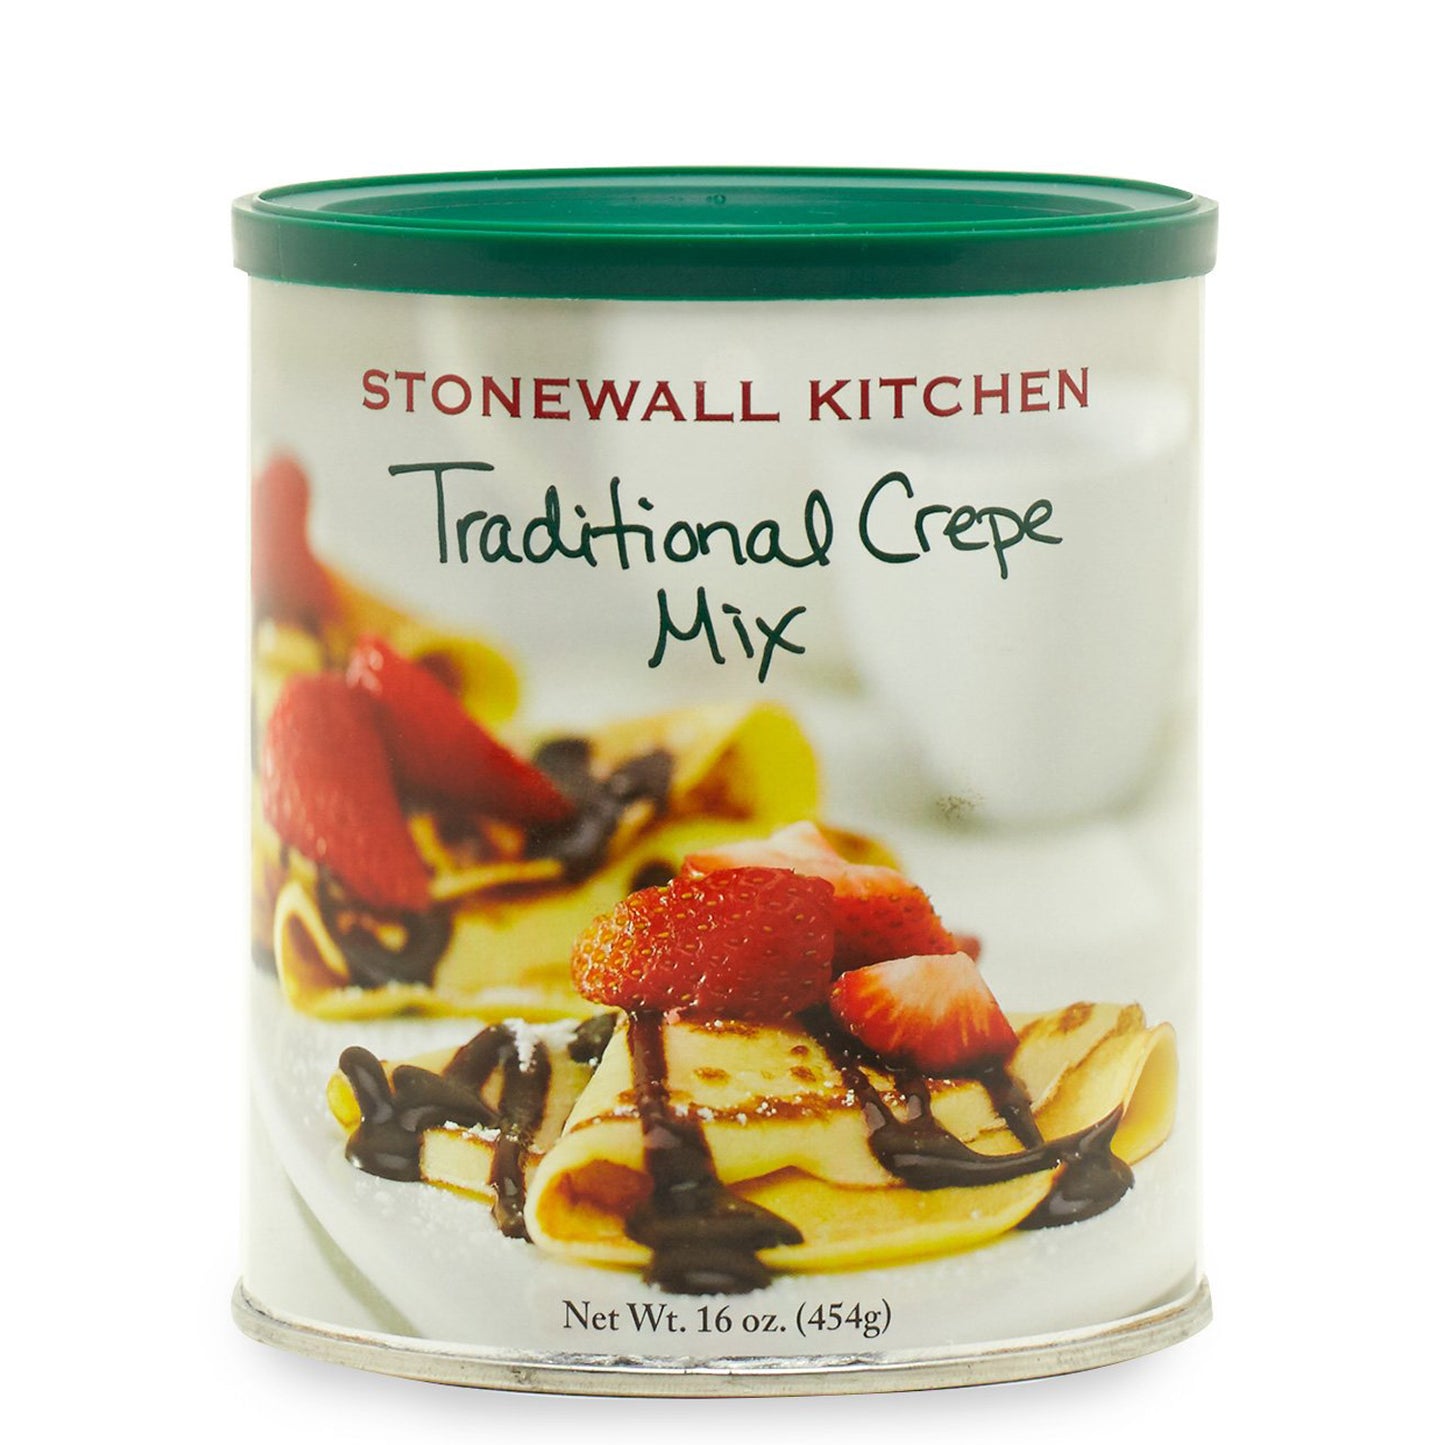 Traditional Crepe Mix